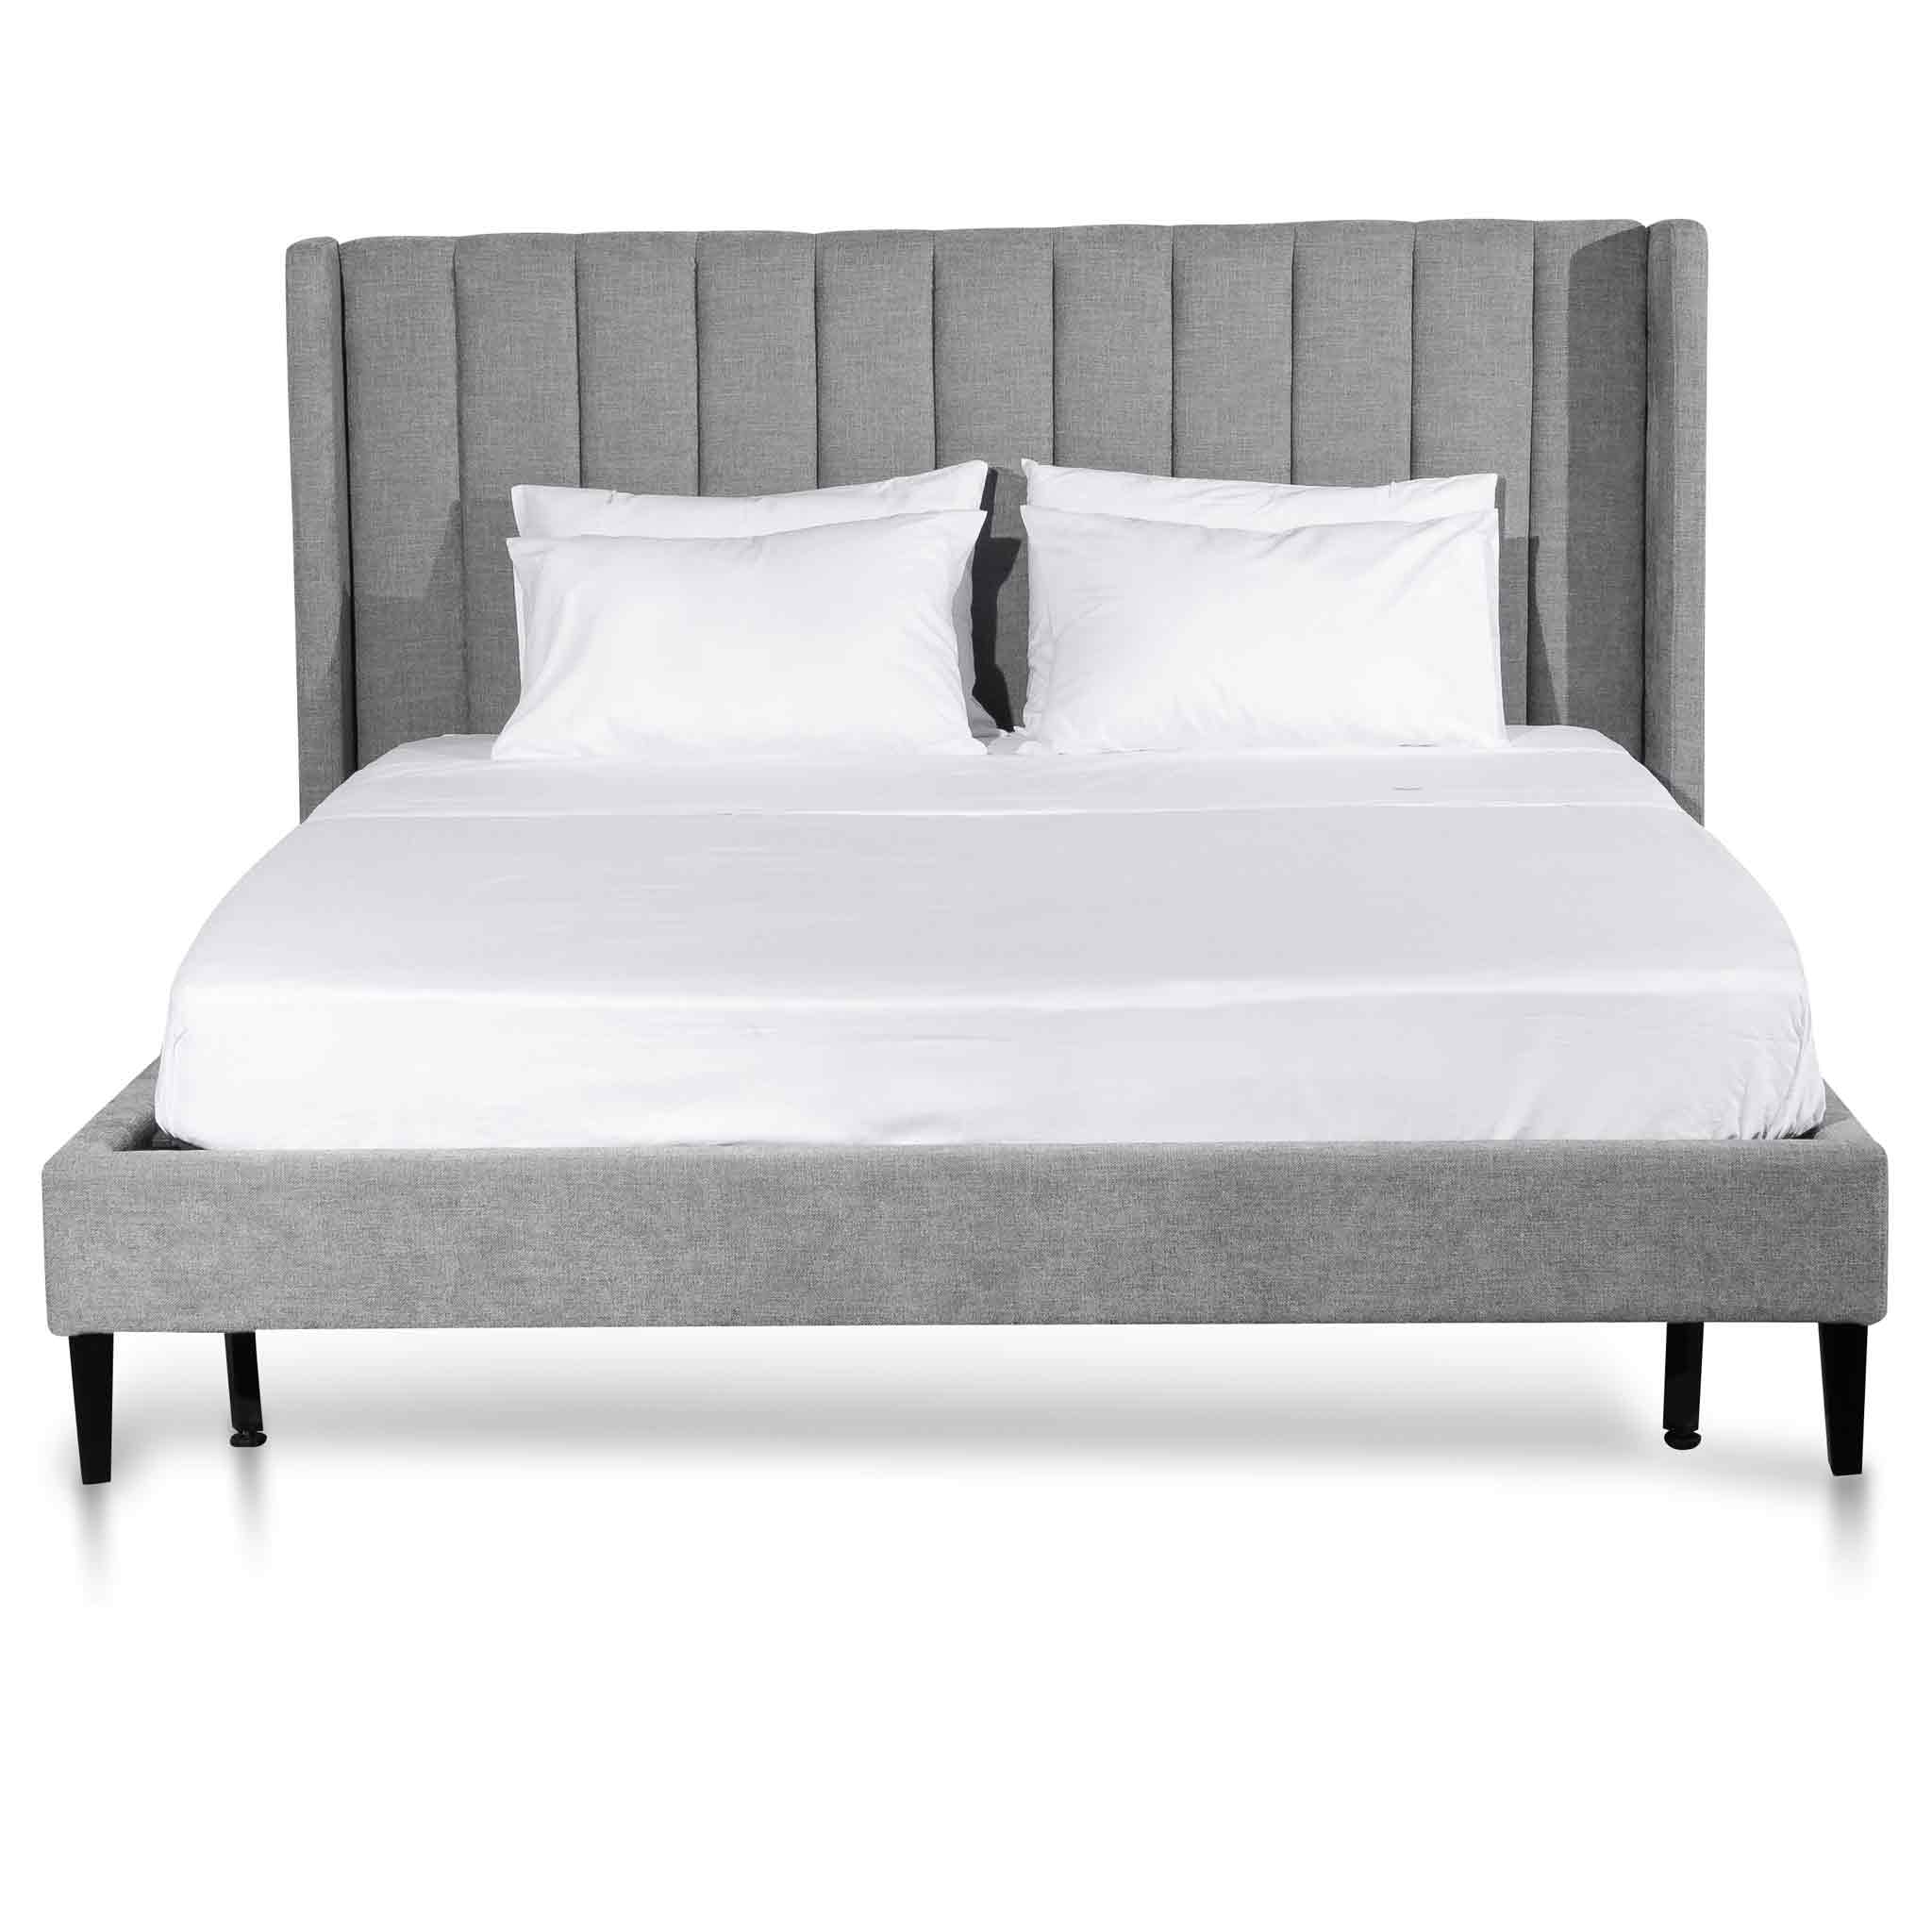 Mark Fabric King Bed Frame - Fossil Grey - Beds